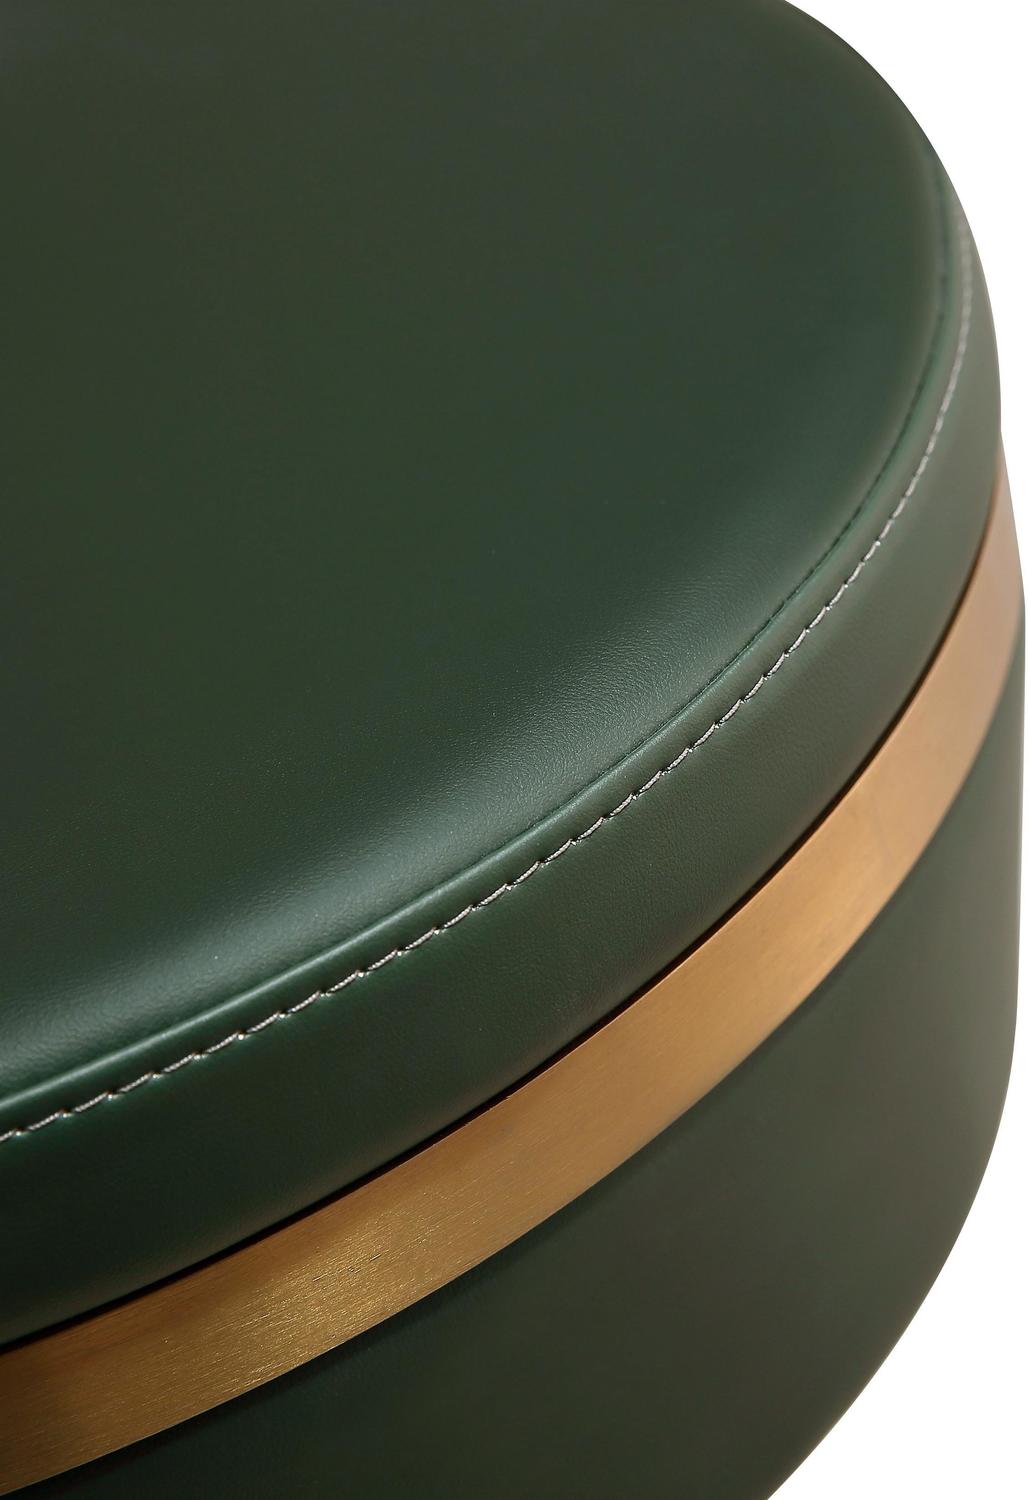 electric lounge chair Contemporary Design Furniture Stools Green